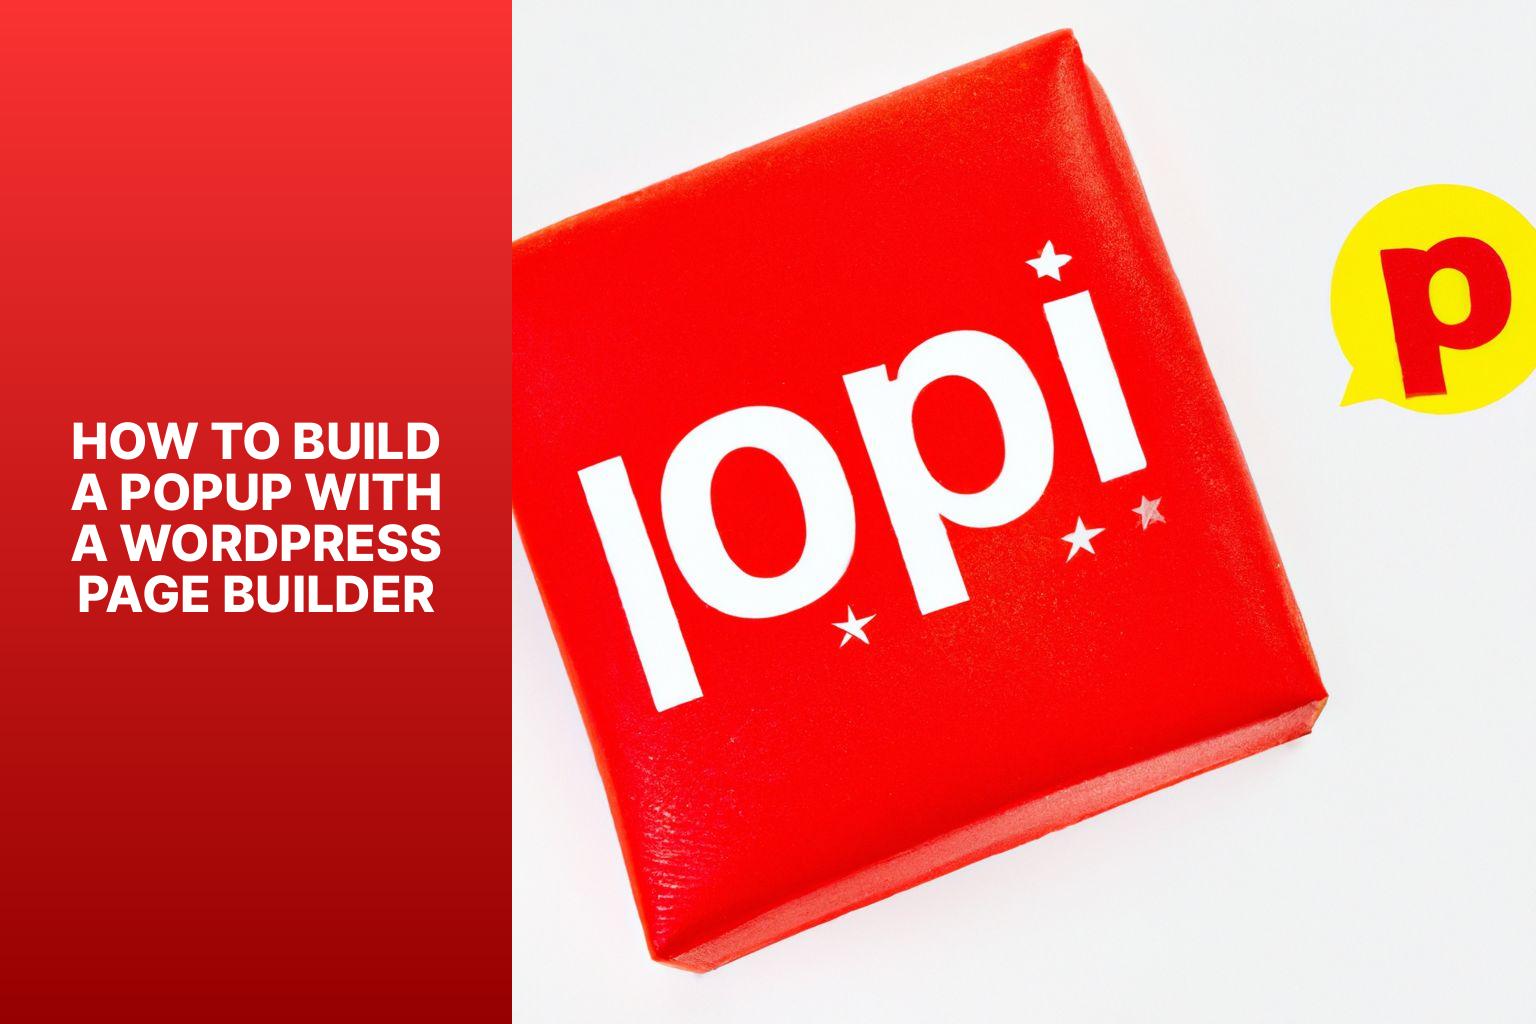 How to Build a Popup with a WordPress Page Builder